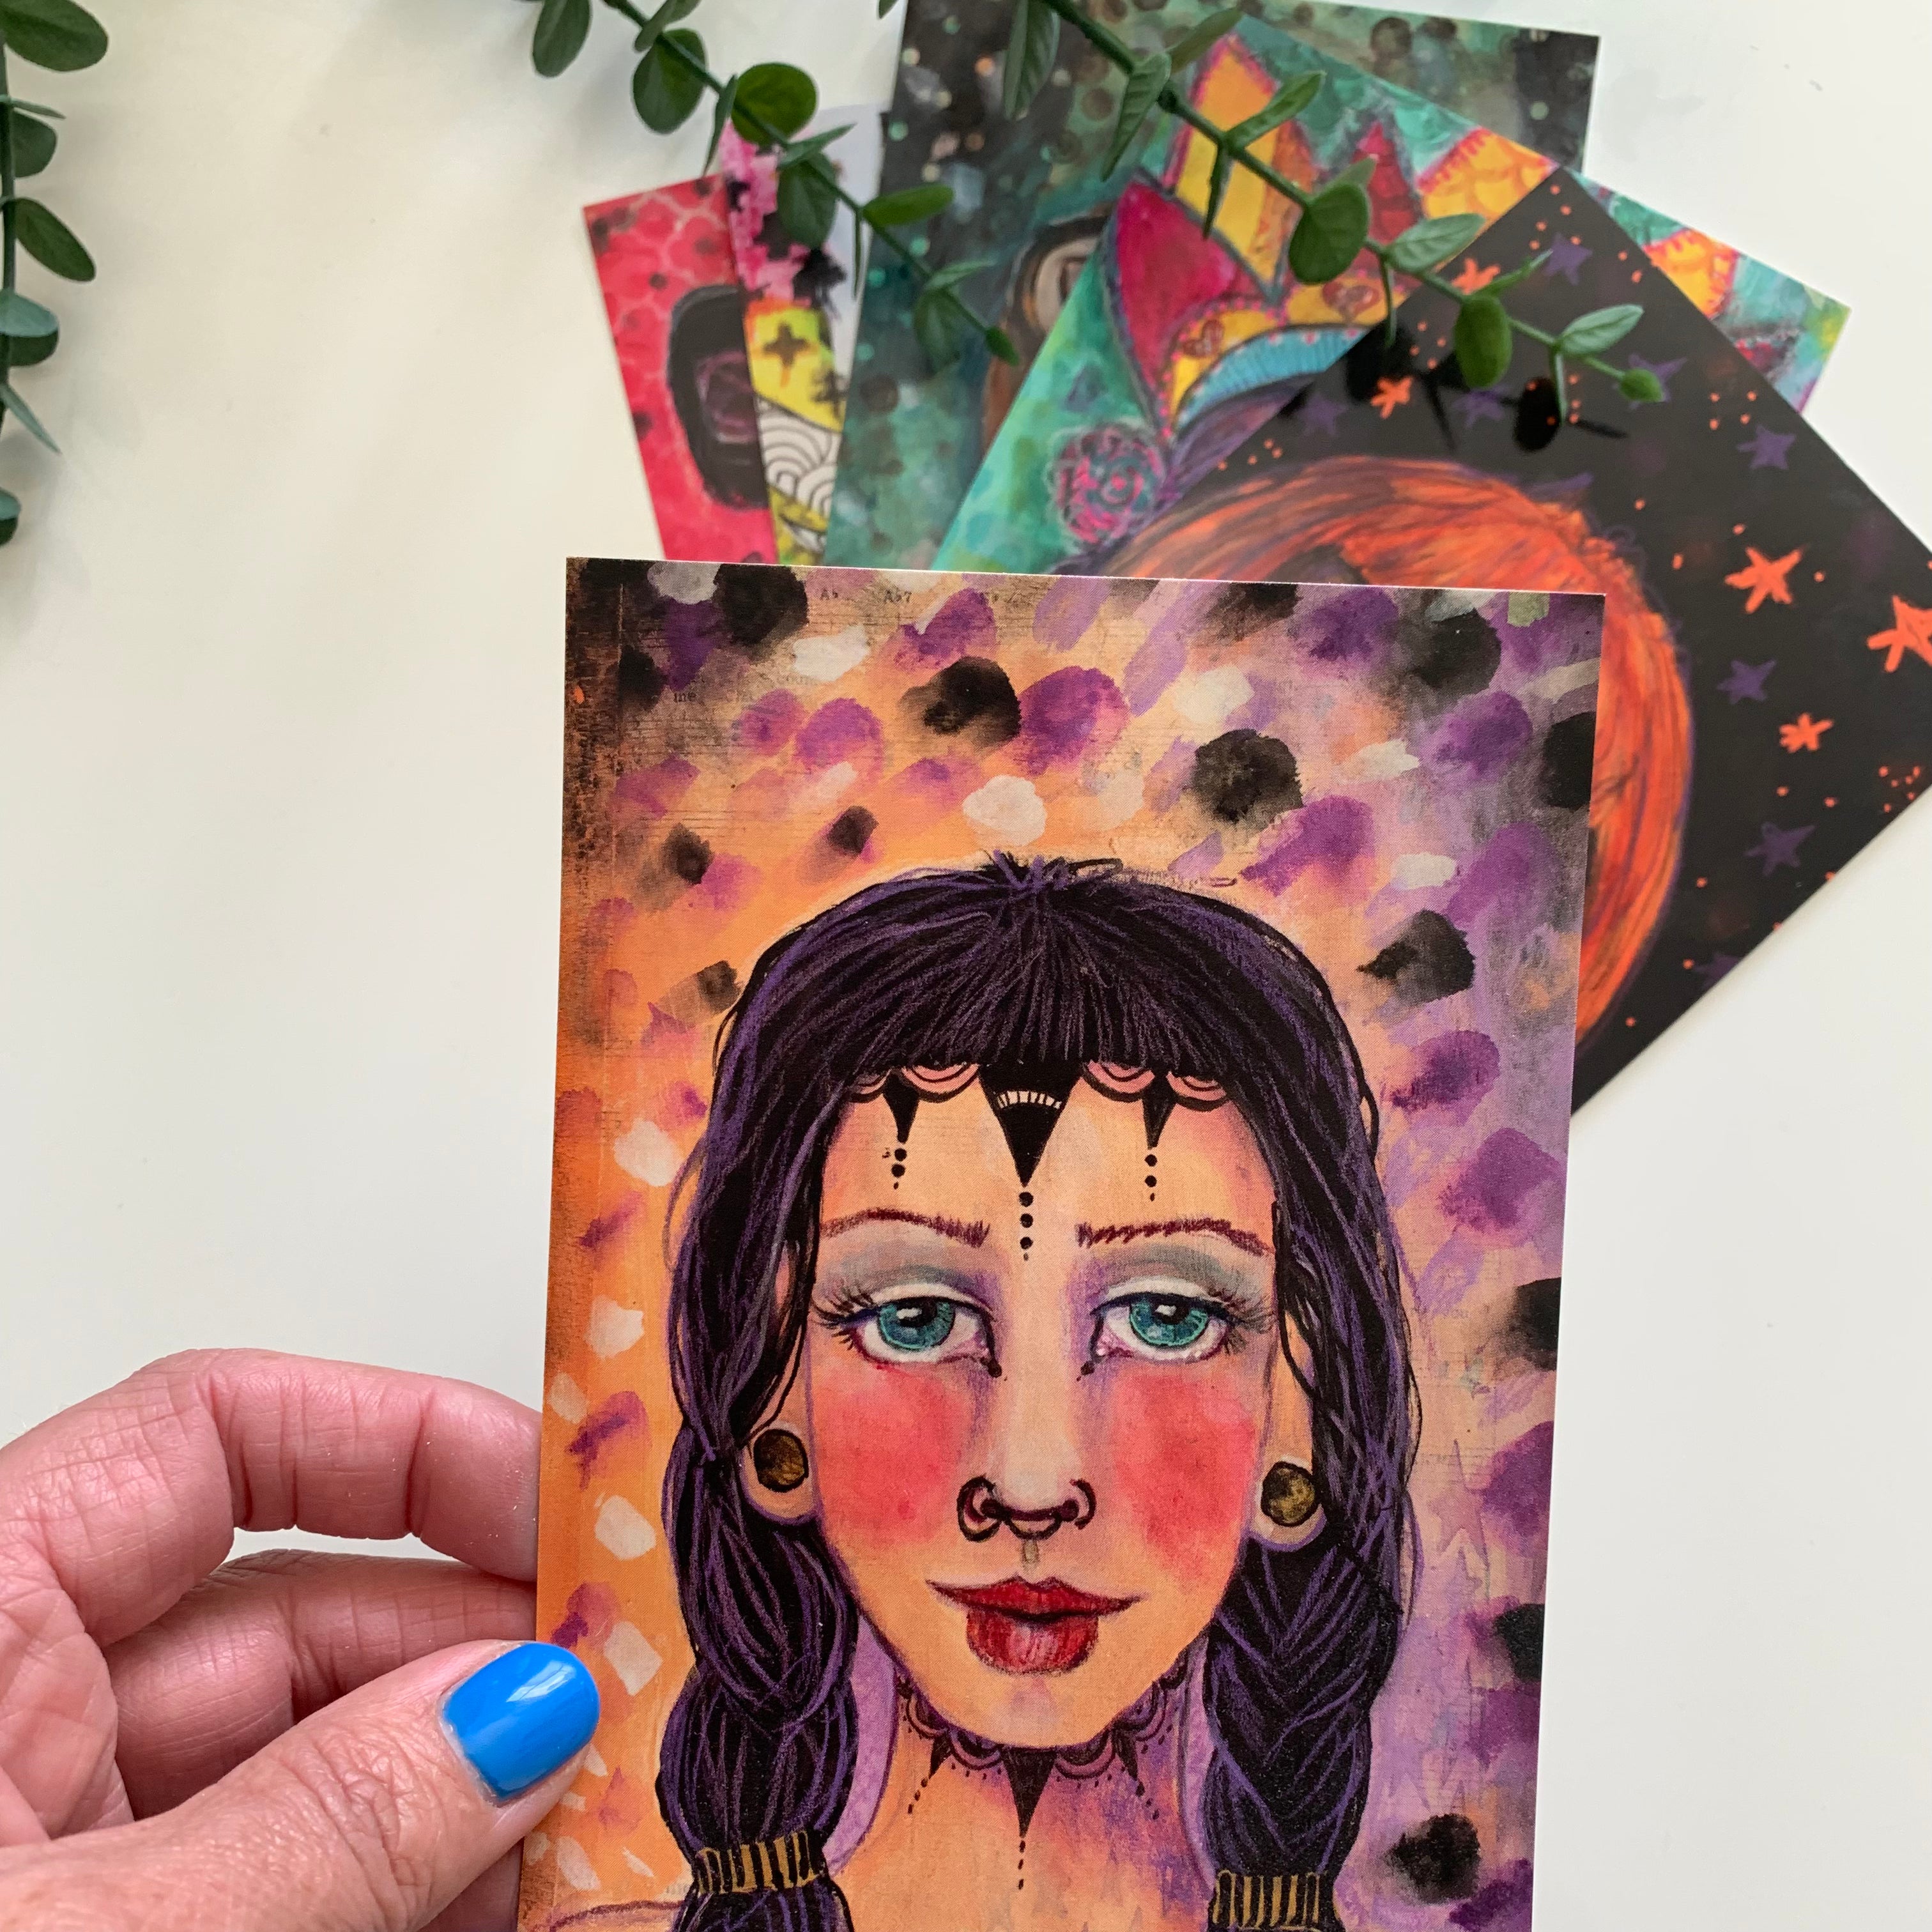 Warrior princess mixed media A6 post card by Adelien's Art